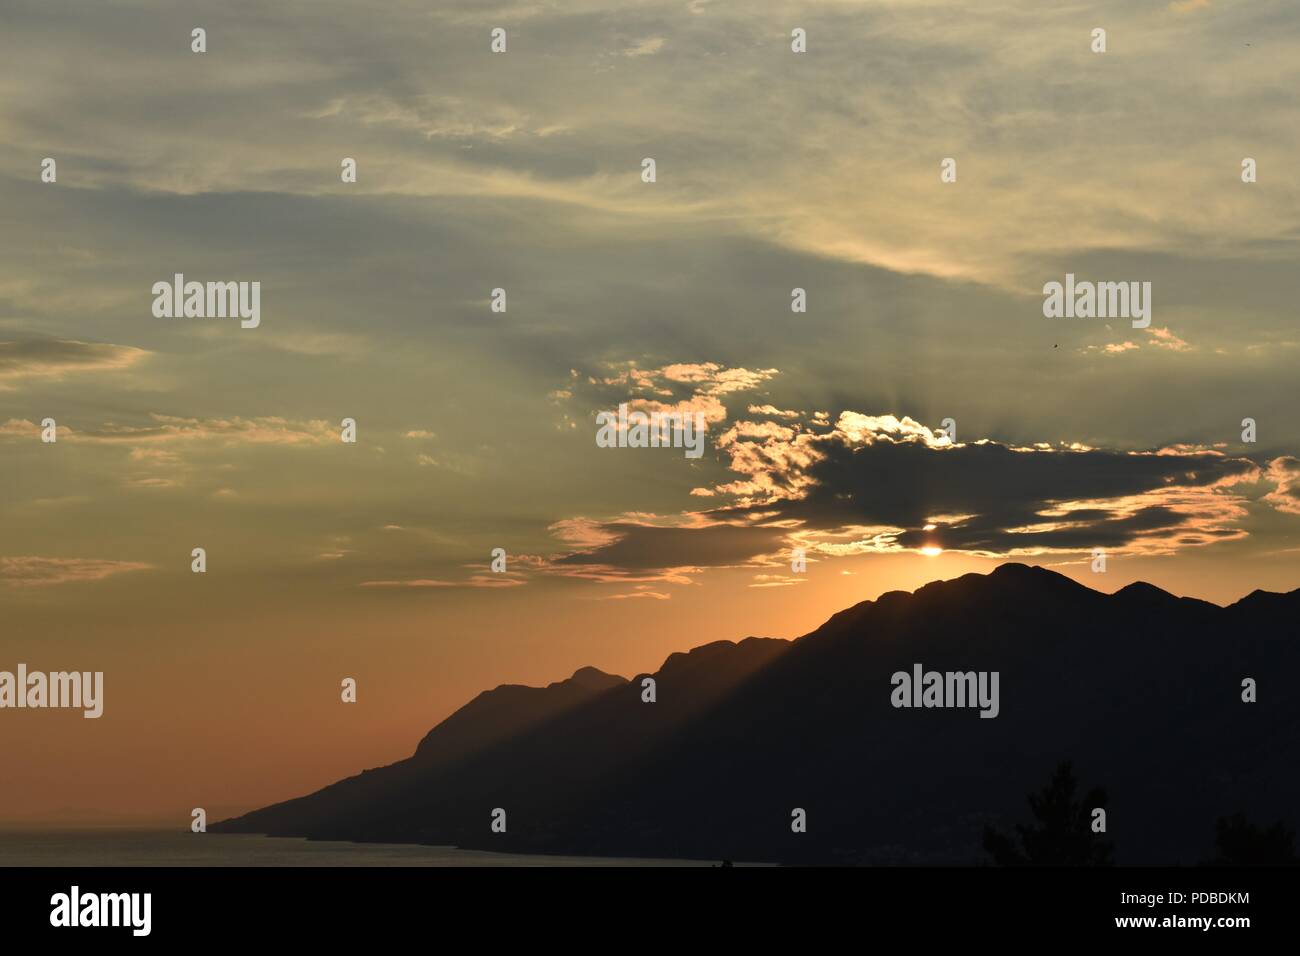 Bright Orange Sunset Silhouetting the Mountains of the Dalmatian Coast Croatia with Sunlight Beaming through the Clouds Stock Photo